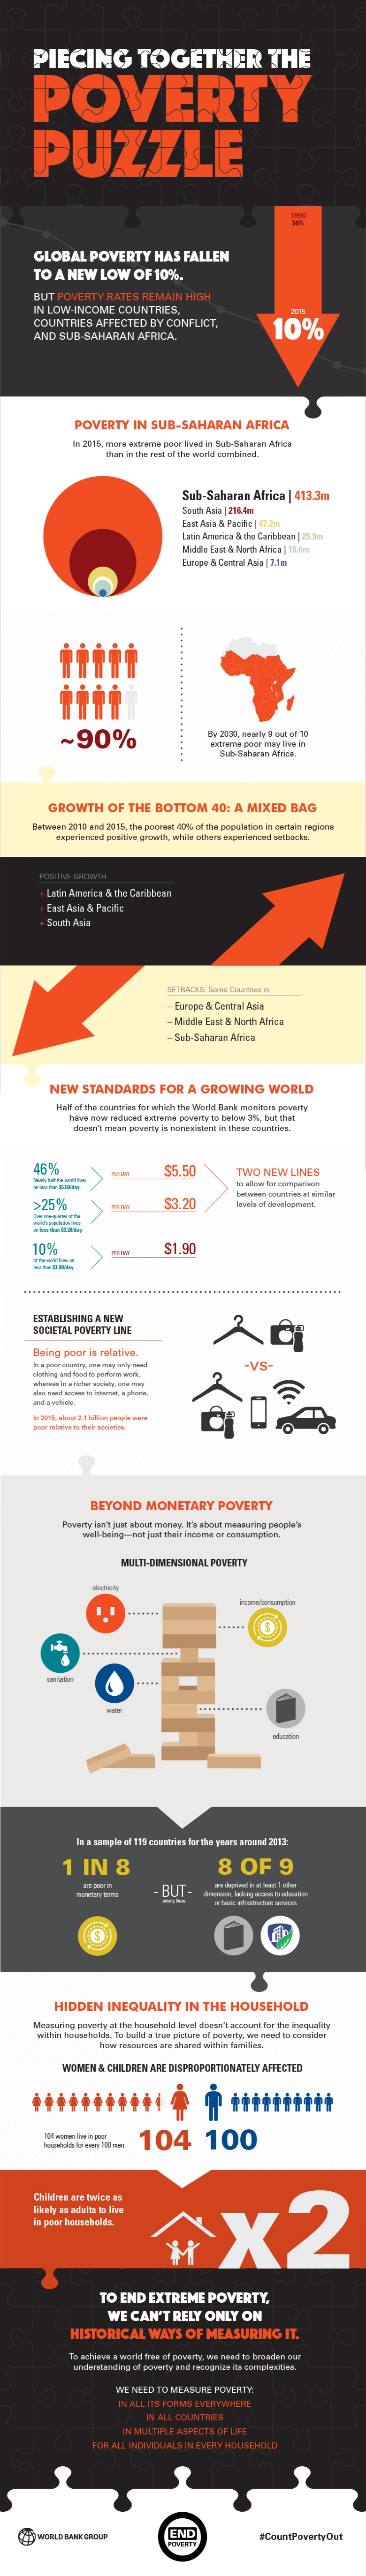 Infographic Poverty And Shared Prosperity 2016 Taking On Inequality - Riset